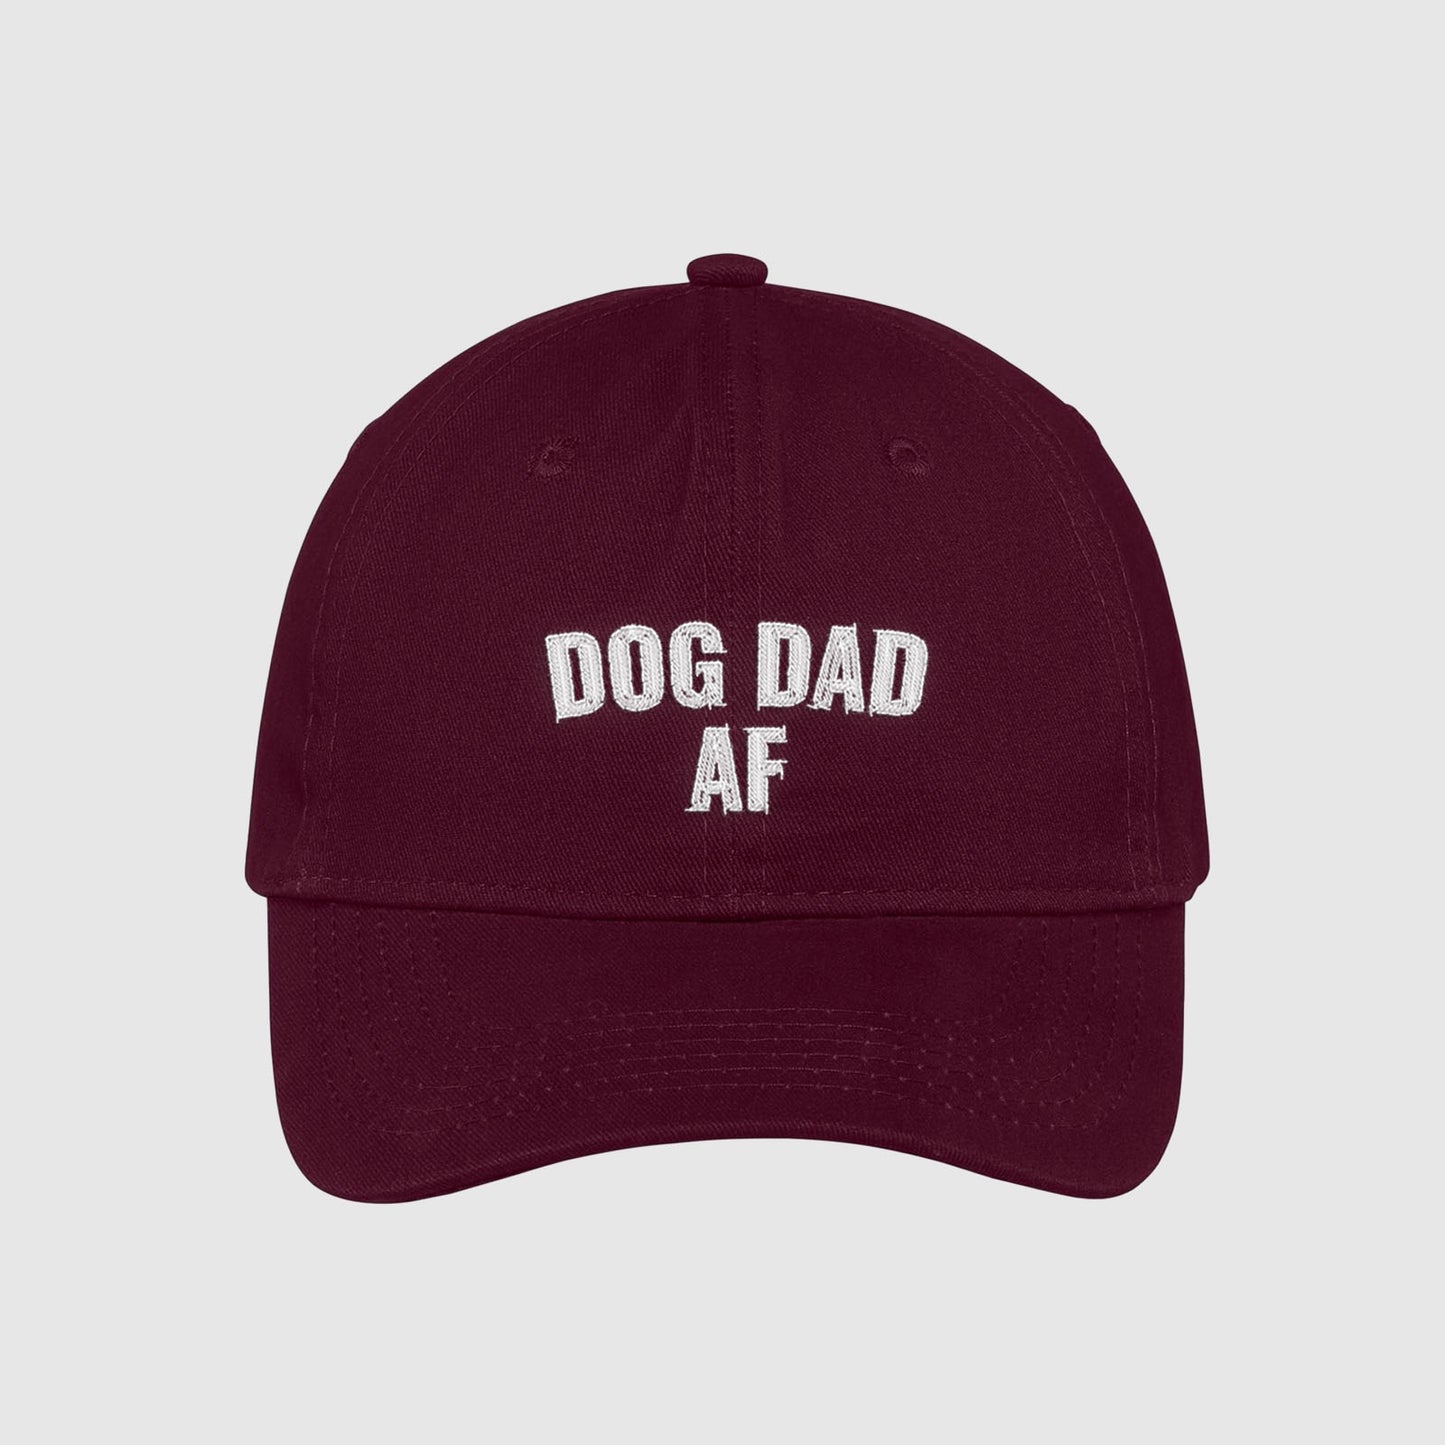 Maroon Dog Dad AF Hat embroidered with white text